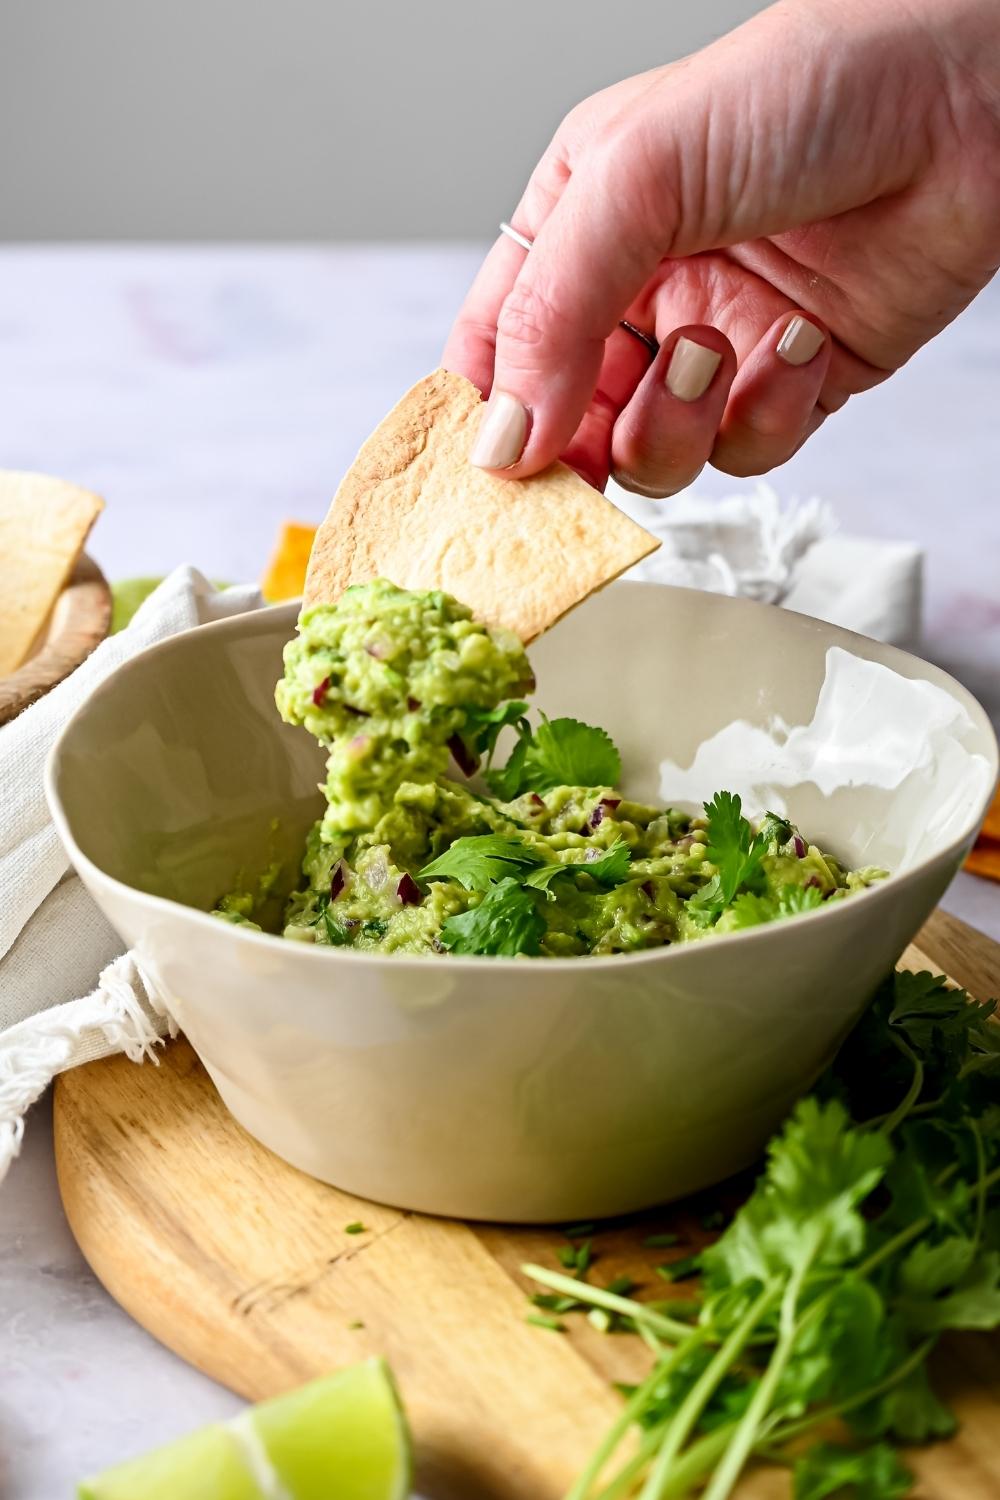 A bowl of homemade chipotle guacamole garnished with parsley served on a wooden cutting board. A hand is dipping a tortilla chip in it.